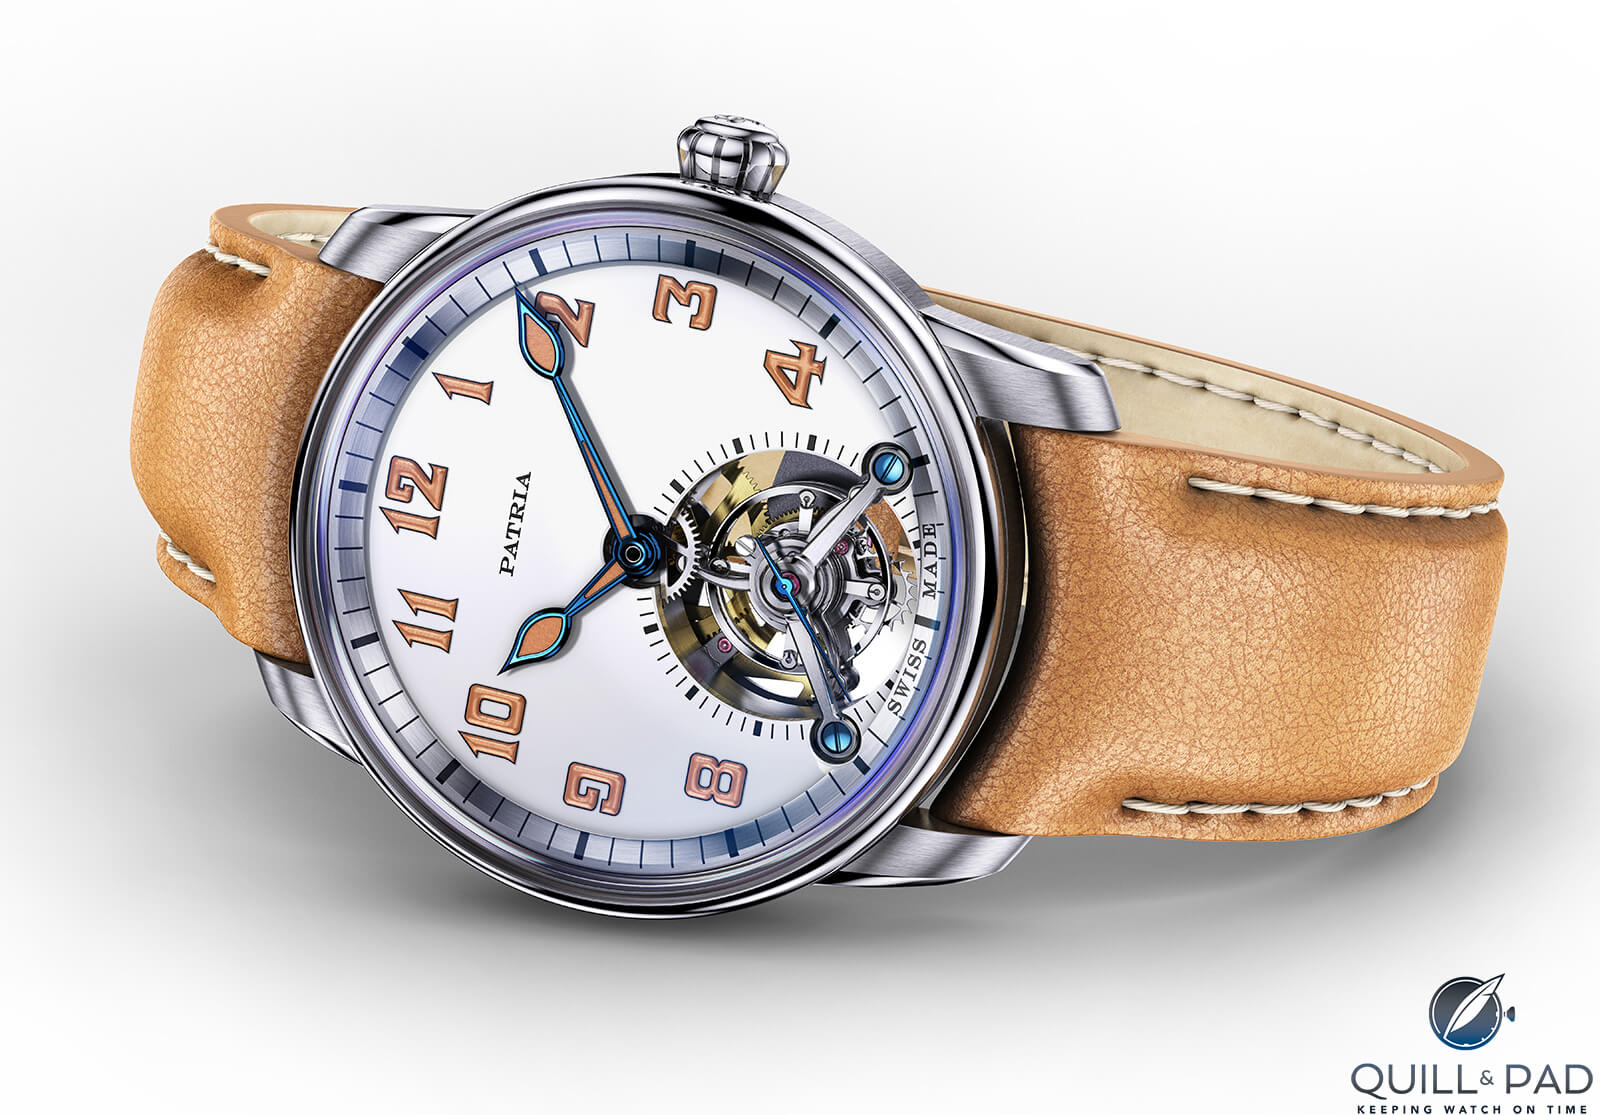 Patria Brigadier Tourbillon Subscription Edition: A Beautifully Hand-Finished, Swiss Made Tourbillon for 18,000 Swiss francs is the Bargain of the Year, perhaps the Decade! – Reprise